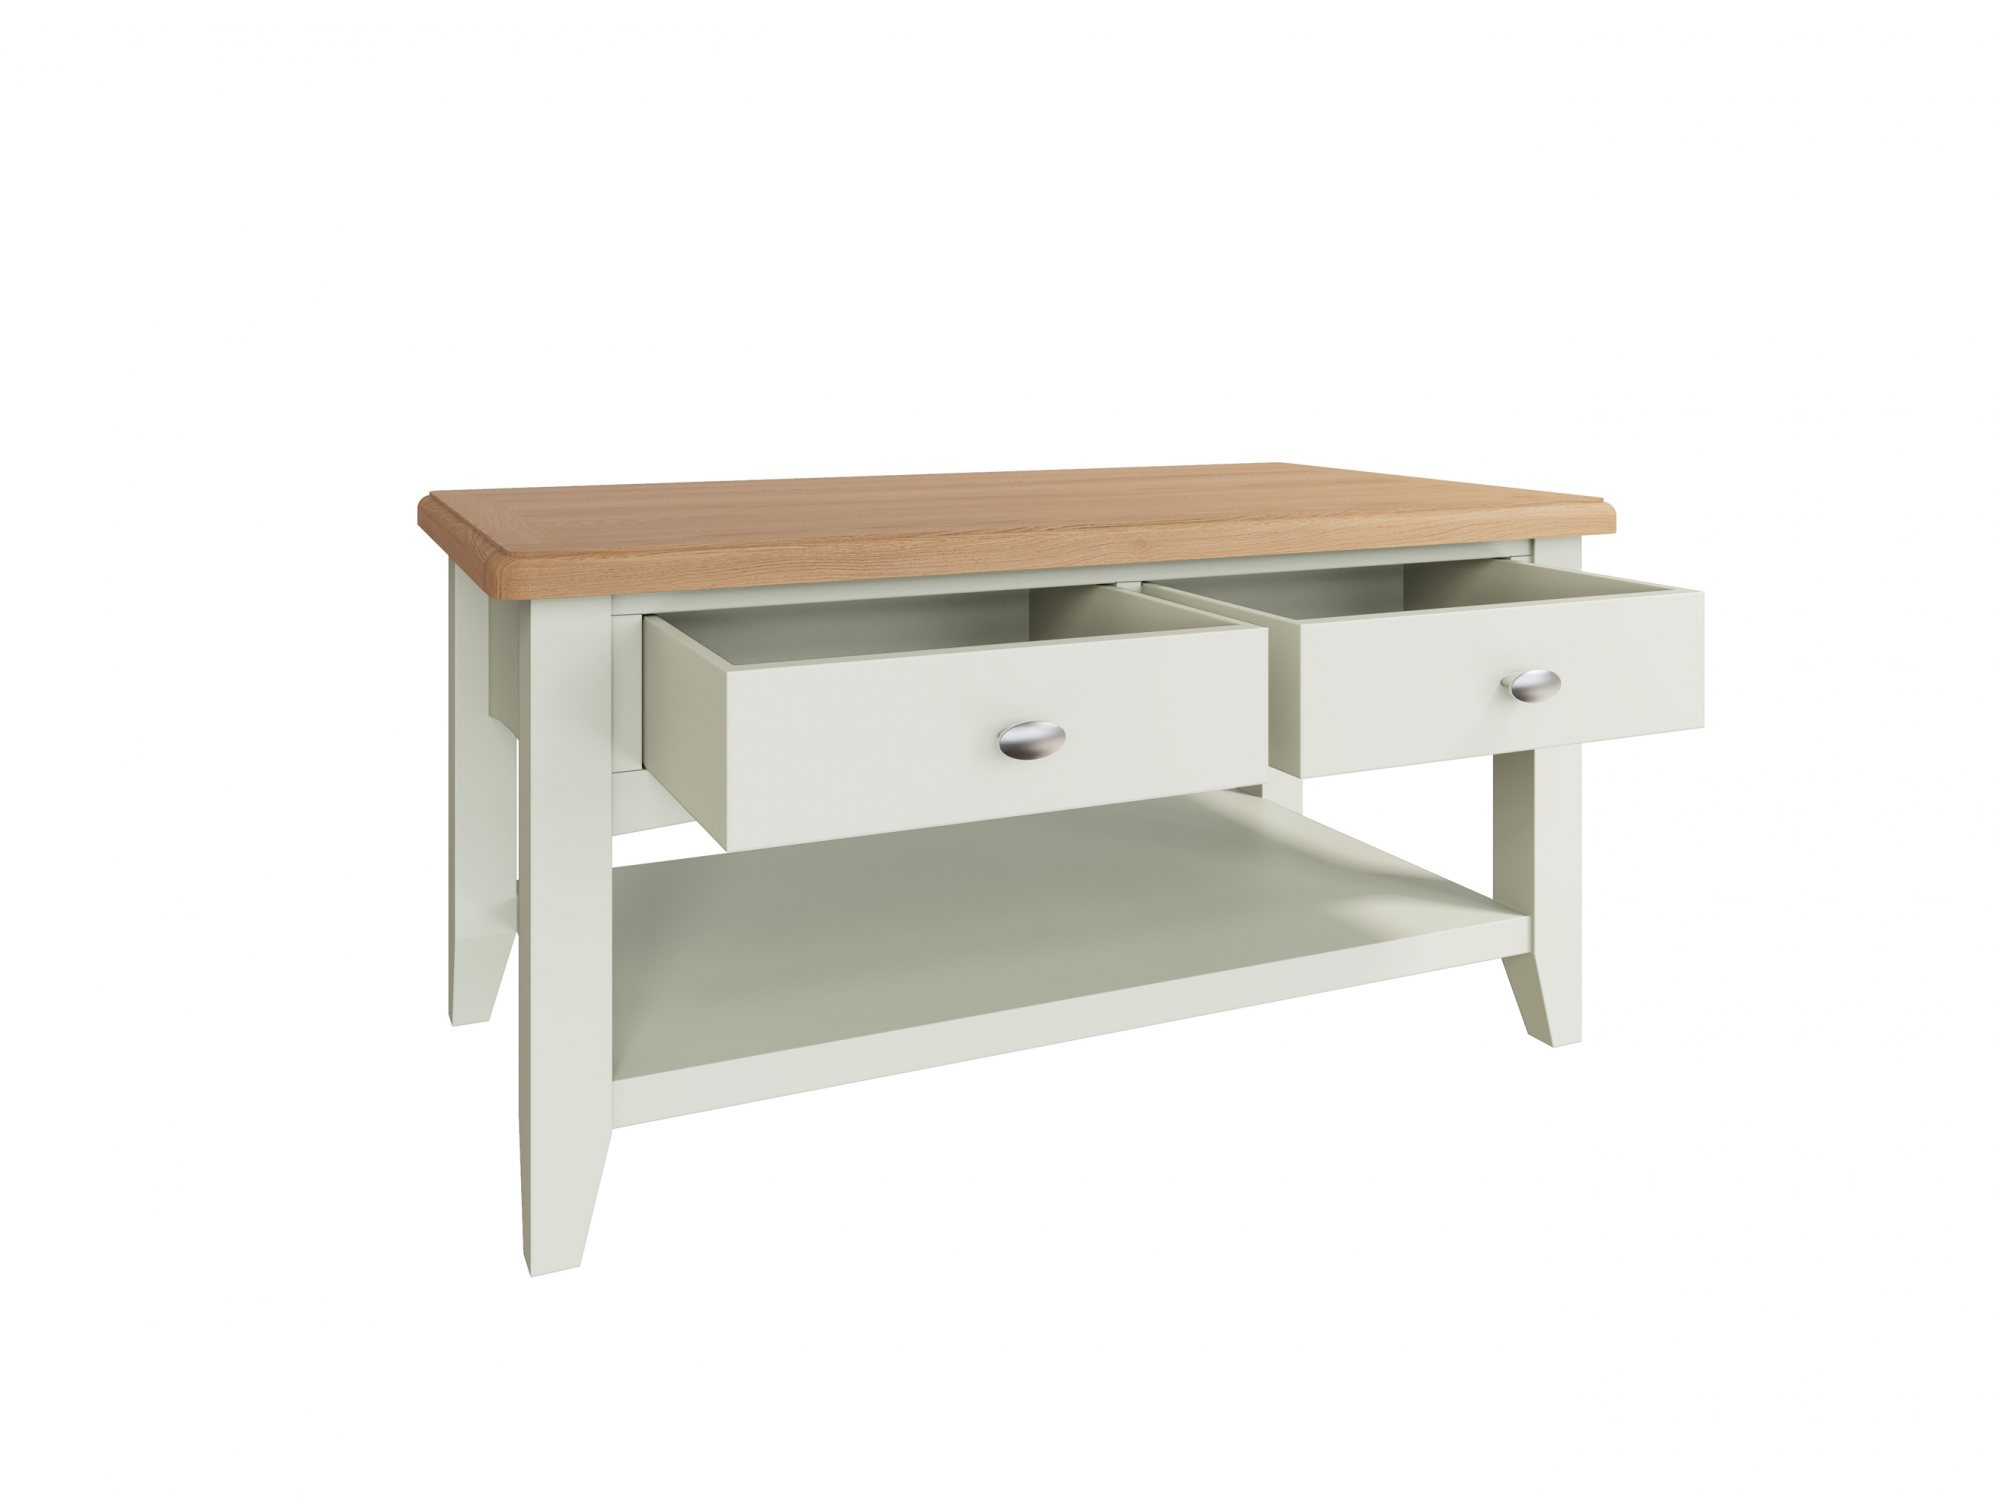 Kenmore Kenmore Patterdale White and Oak 2 Drawer Large Coffee Table (Flat Packed)